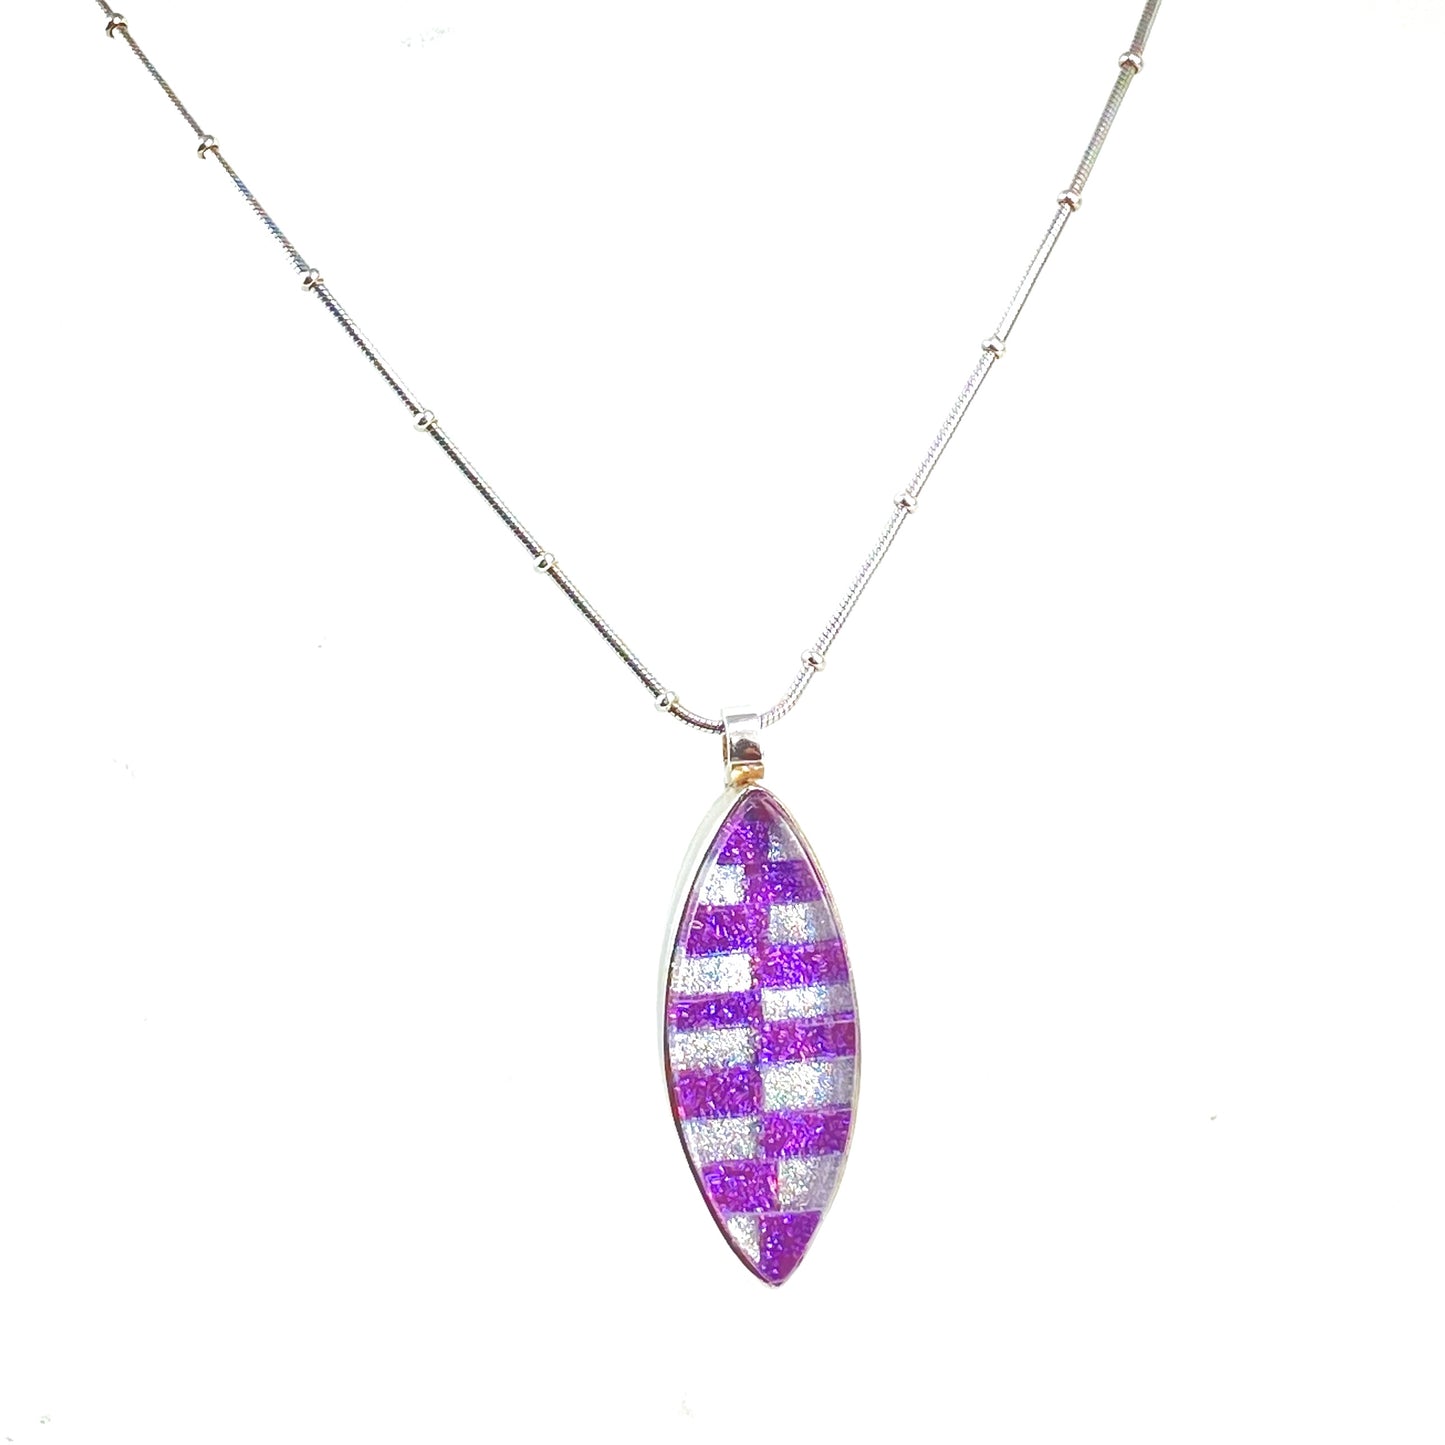 Two tone checkerboard marquise necklace in cotton candy pink and white pearl glass, fused glass, glass jewelry, glass and silver jewelry, handmade, handcrafted, American Craft, hand fabricated jewelry, hand fabricated jewellery, Athen, Georgia, colorful jewelry, sparkle, bullseye glass, dichroic glass, art jewelry